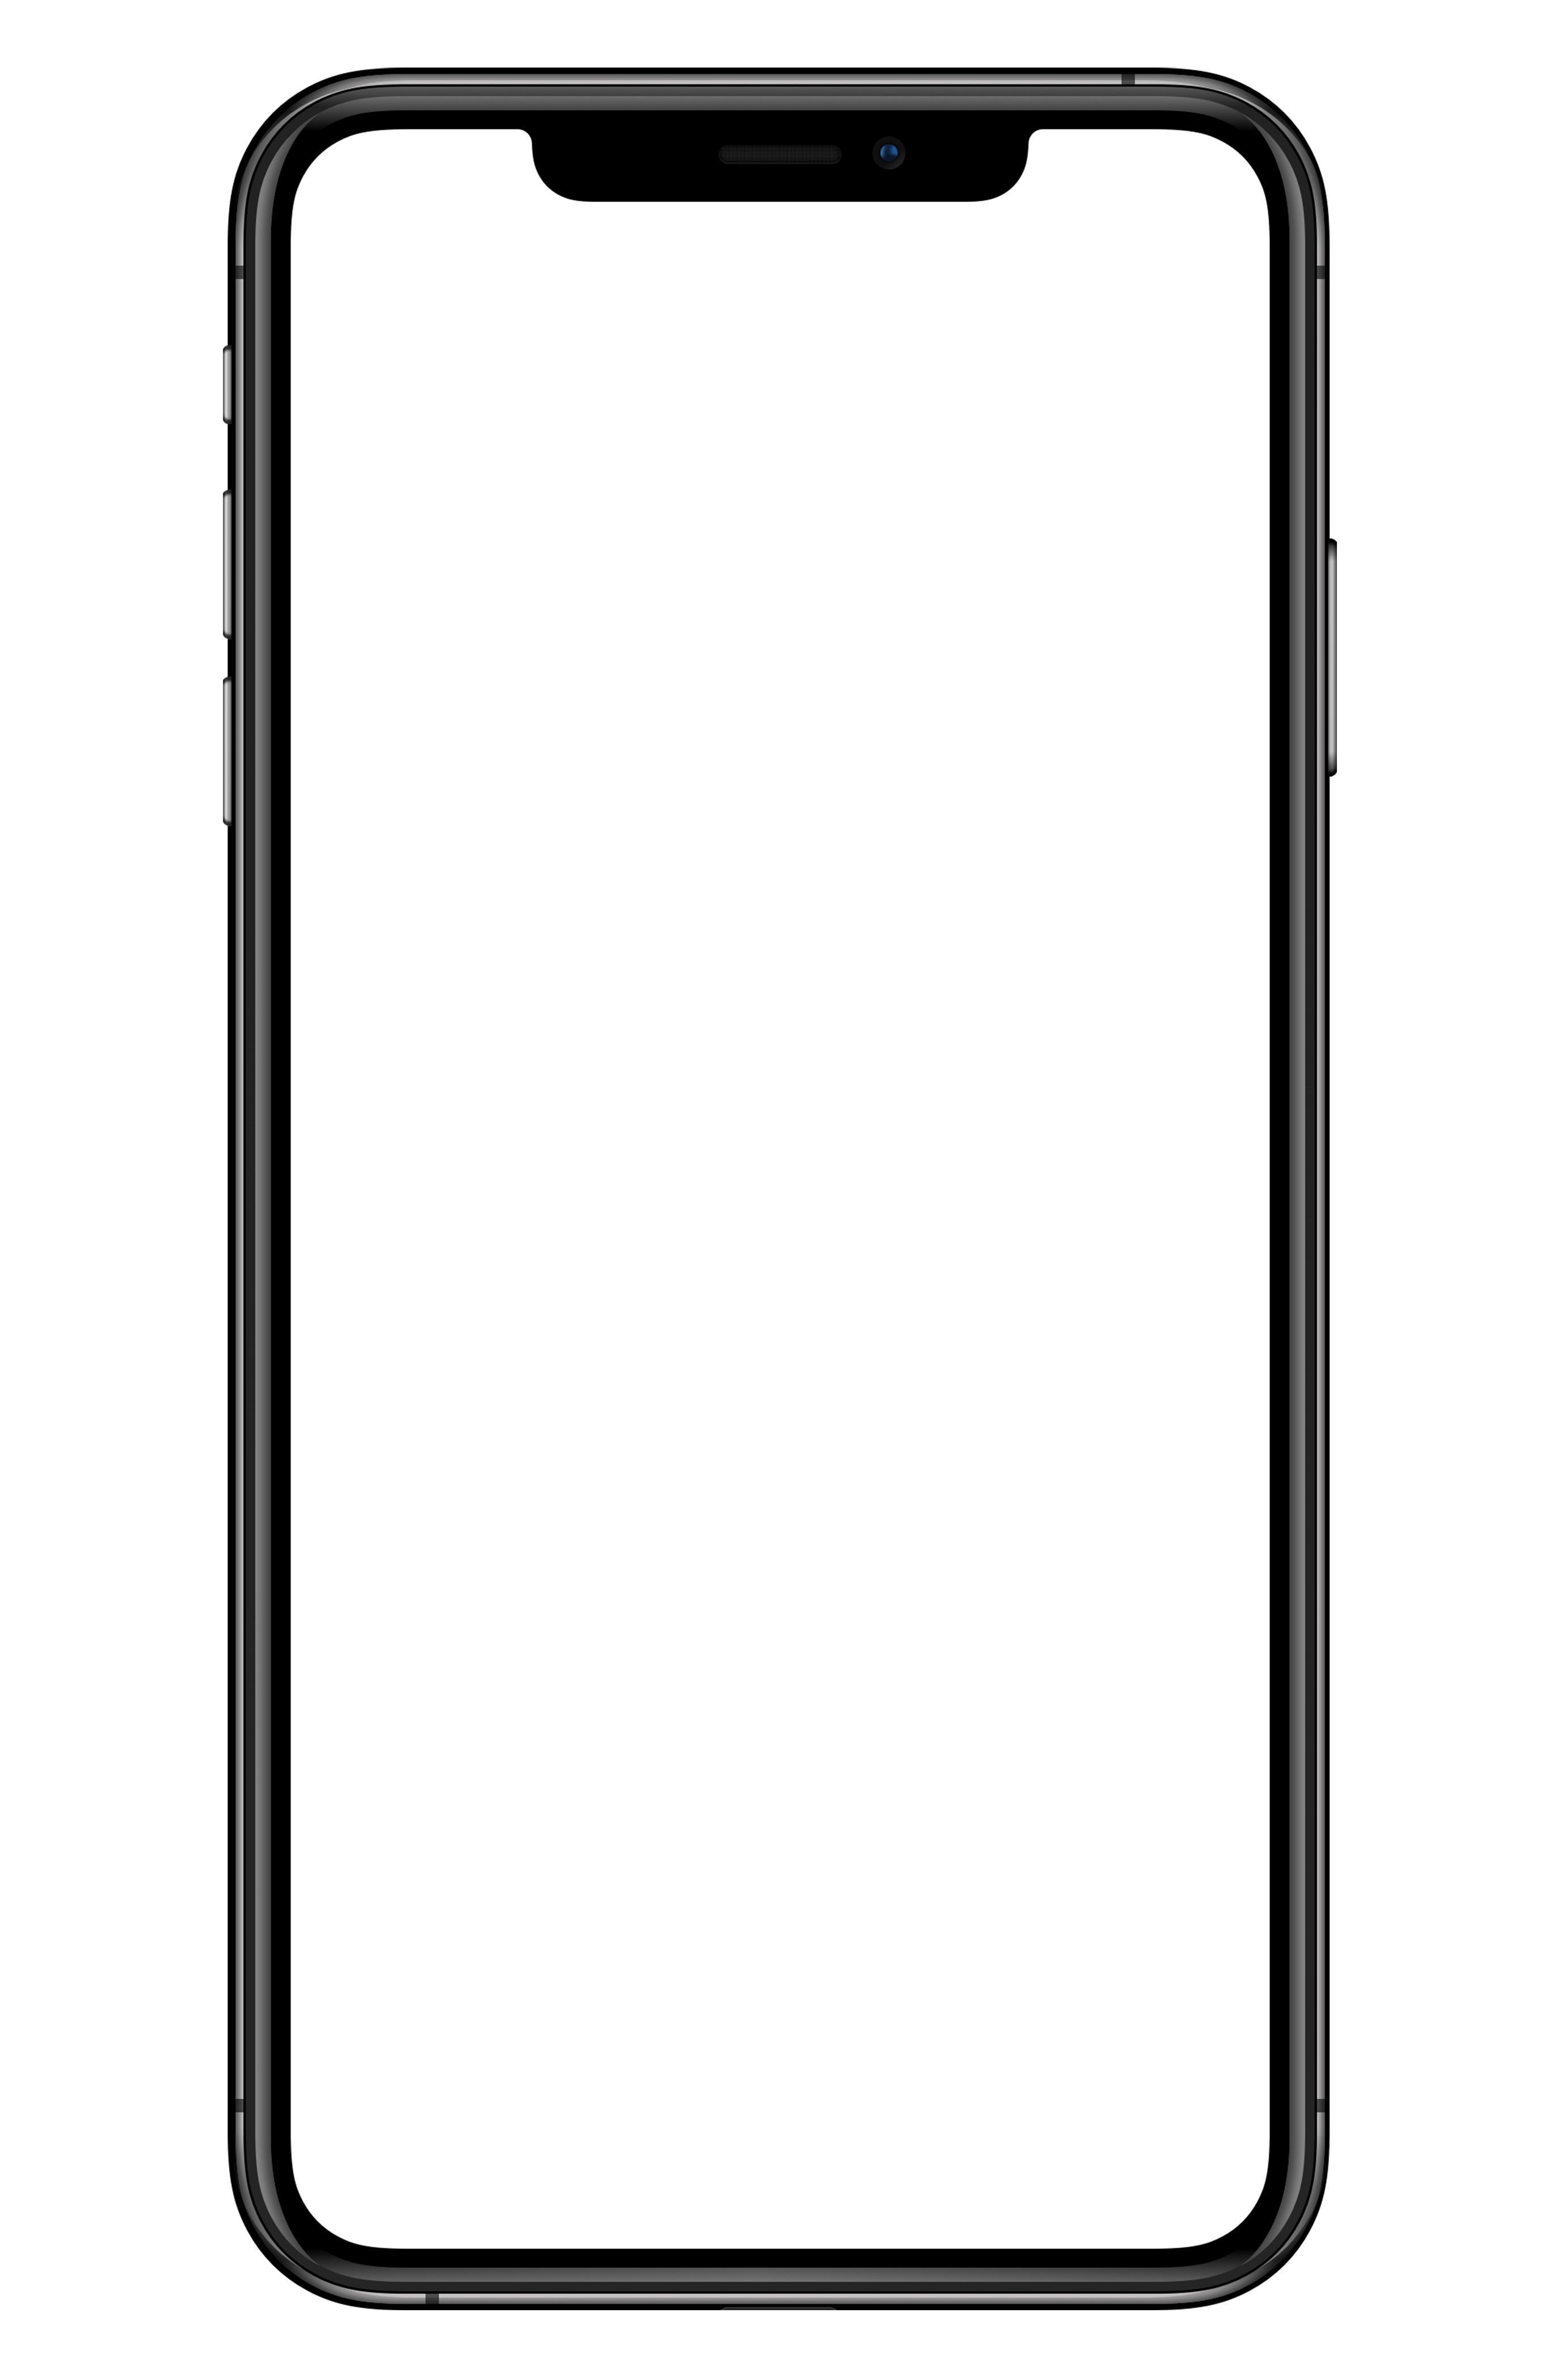 Iphone Xs Max Template Png : Polish your personal project or design